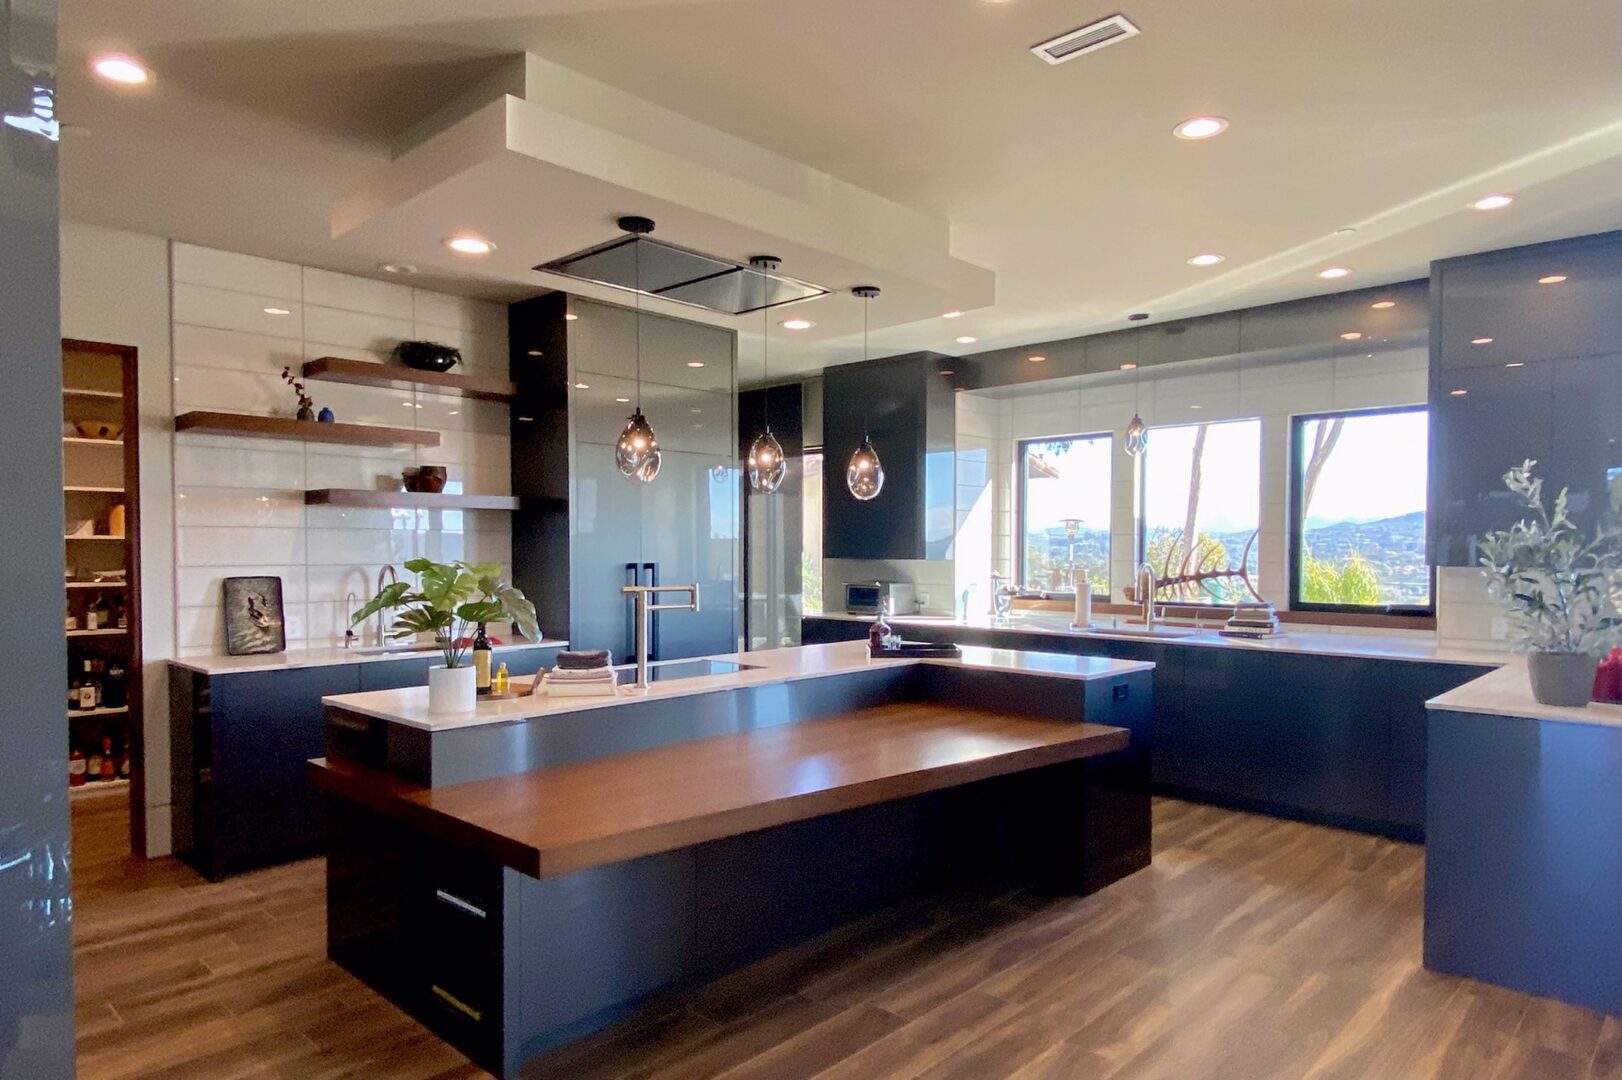 A kitchen with a large island and wooden floors